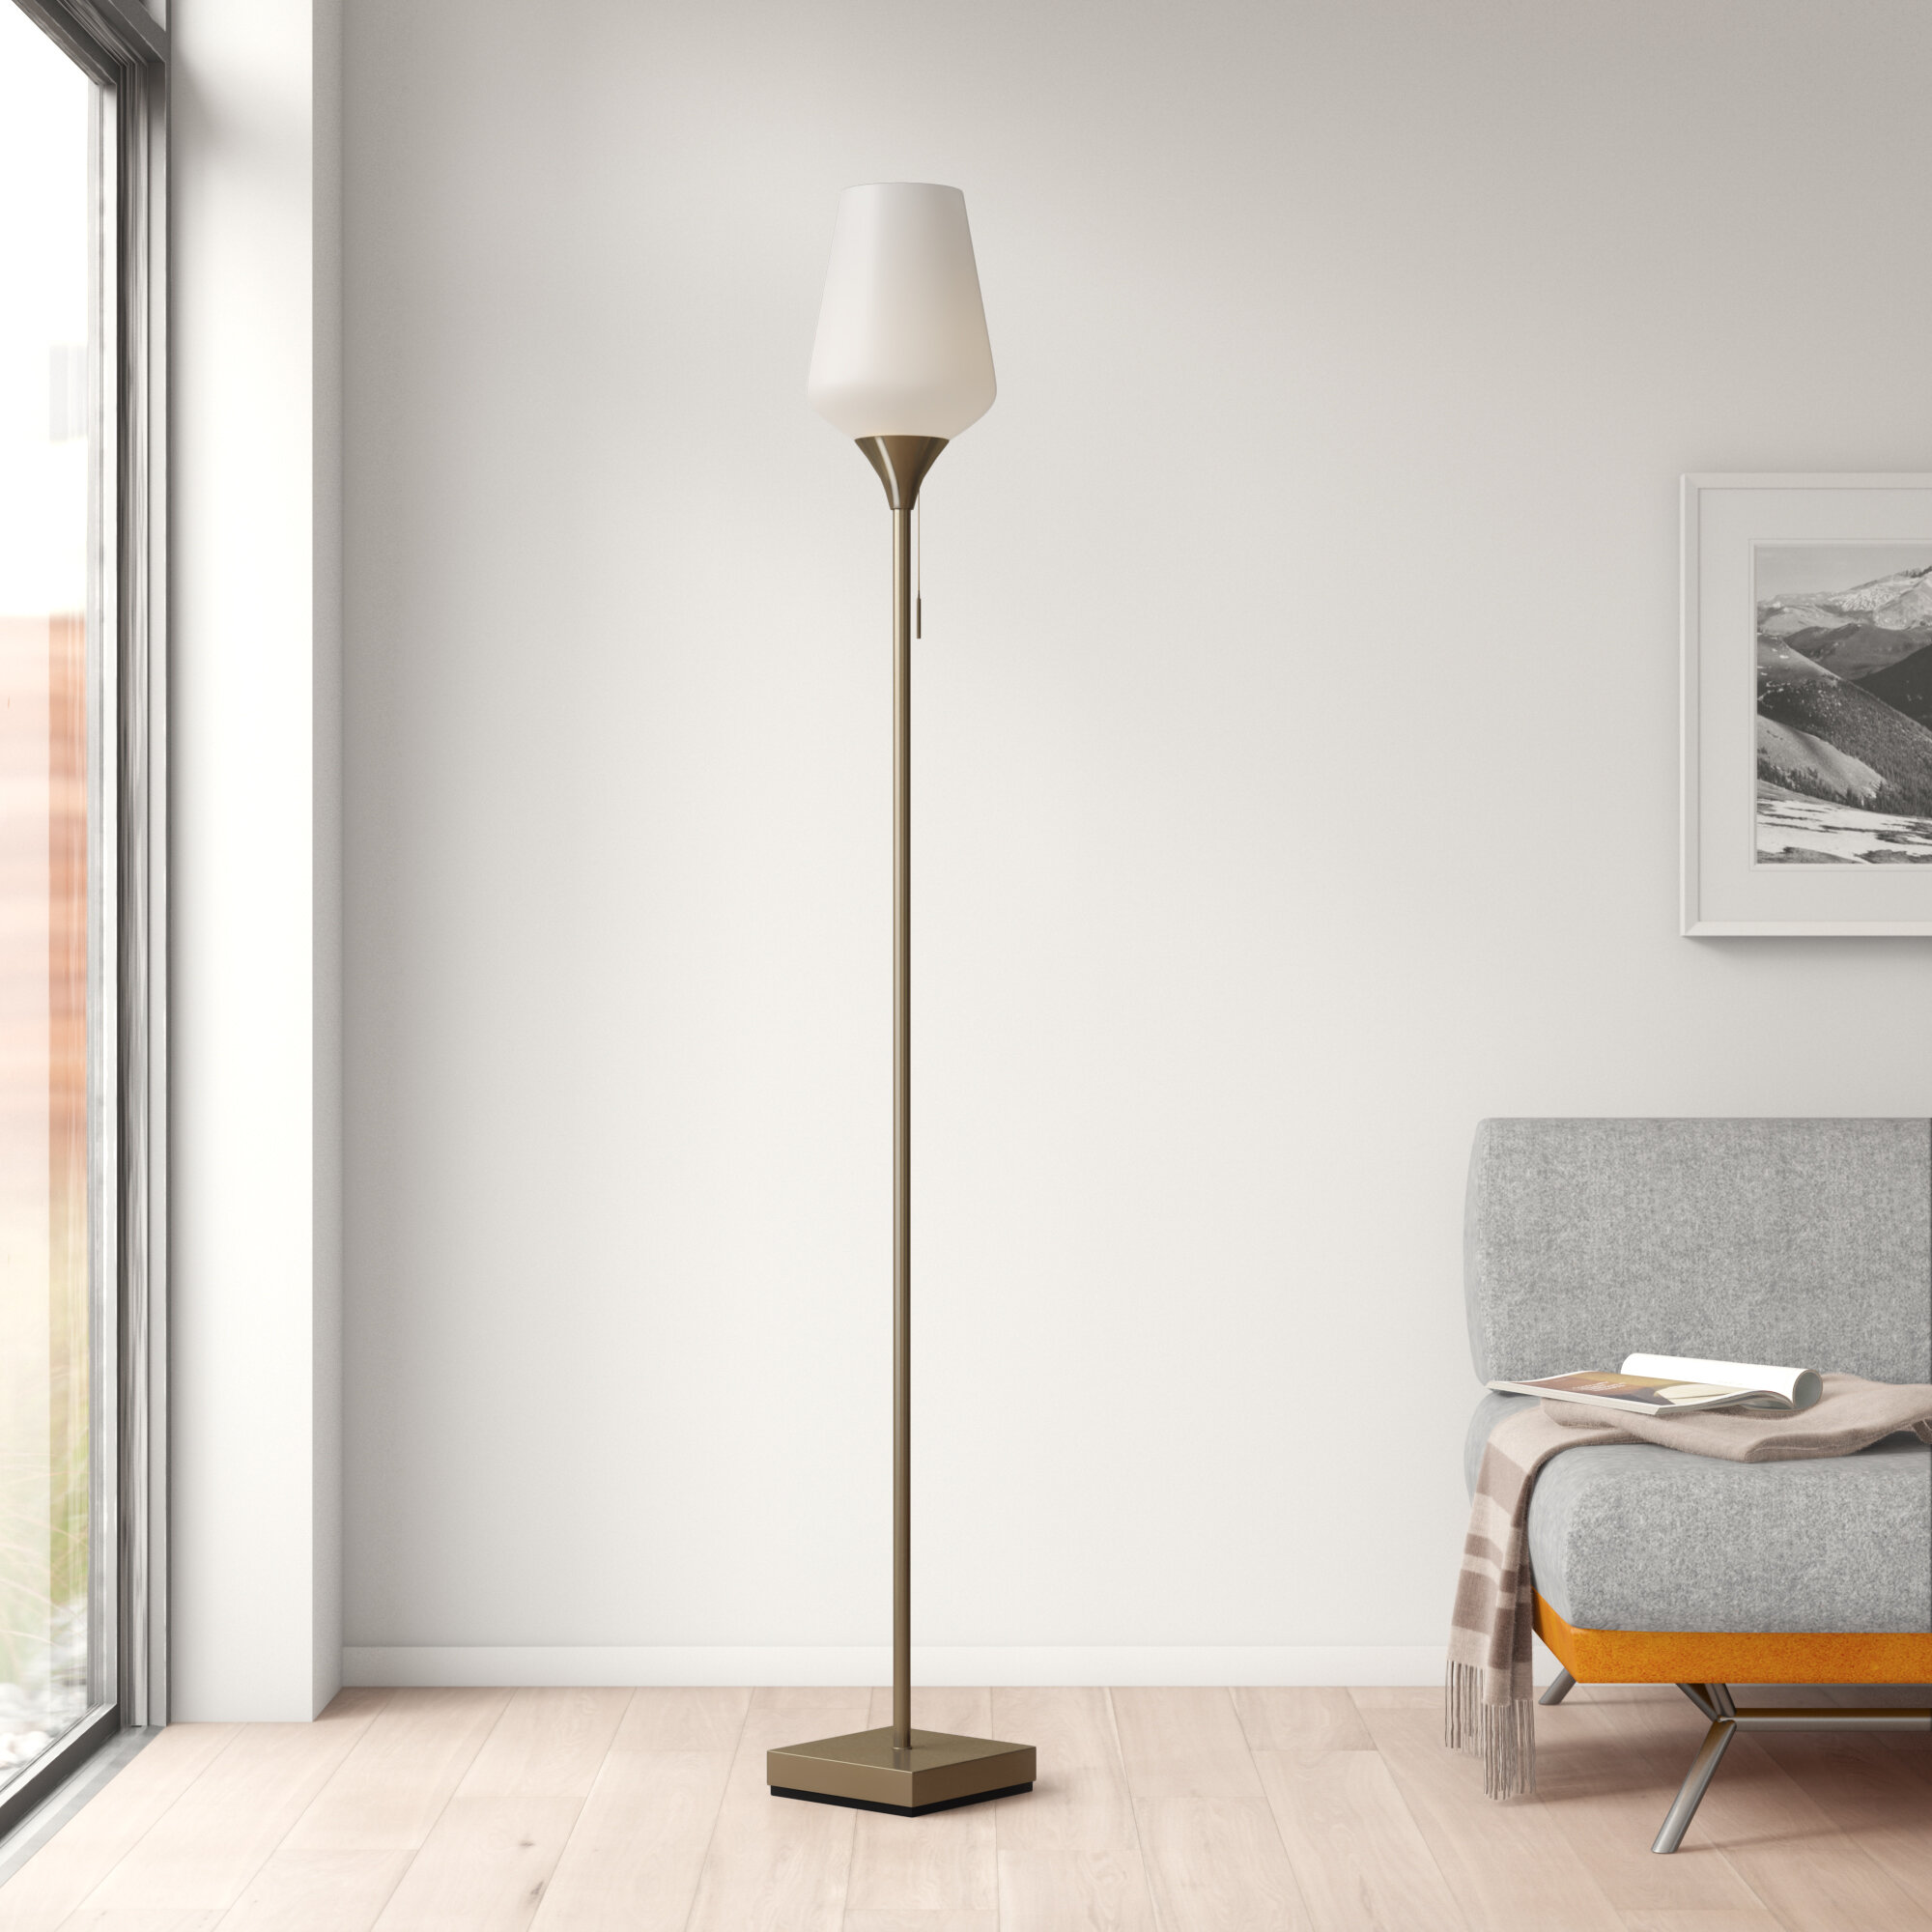 Led Floor Lamps for Bedroom Floor Lamps for Living Room,Satin Finish in-Line On/Off Foot Switch,Gold Floor Lamp with White Jade Glass Shade Industrial Floor Lamp Bulb Included 